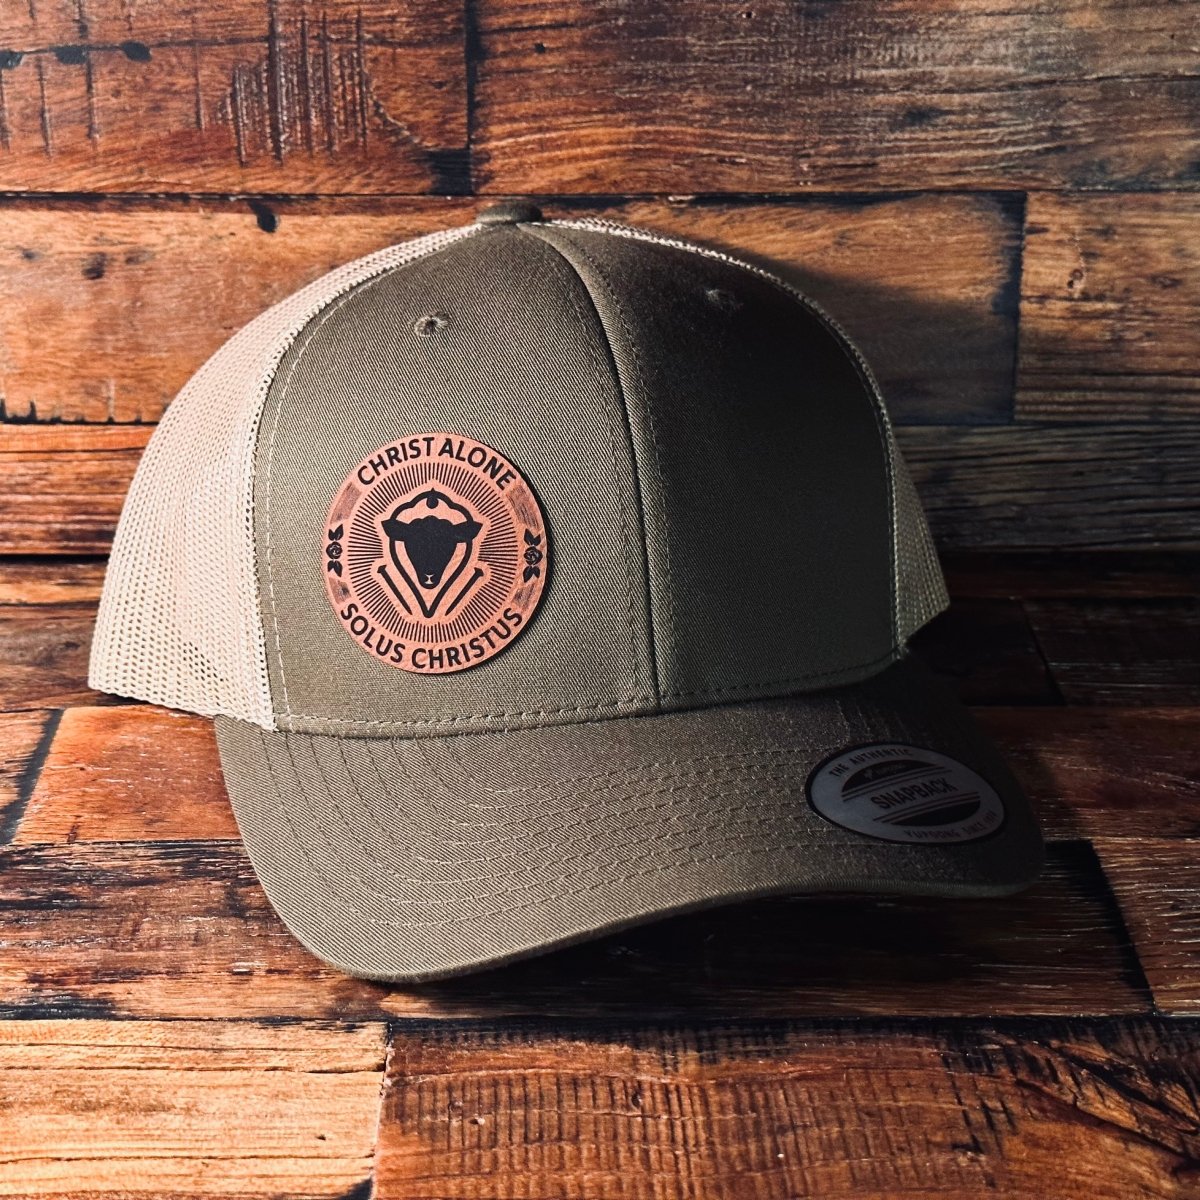 Hat - Solus Christus Seal - Patch Hat - The Reformed Sage - #reformed# - #reformed_gifts# - #christian_gifts#